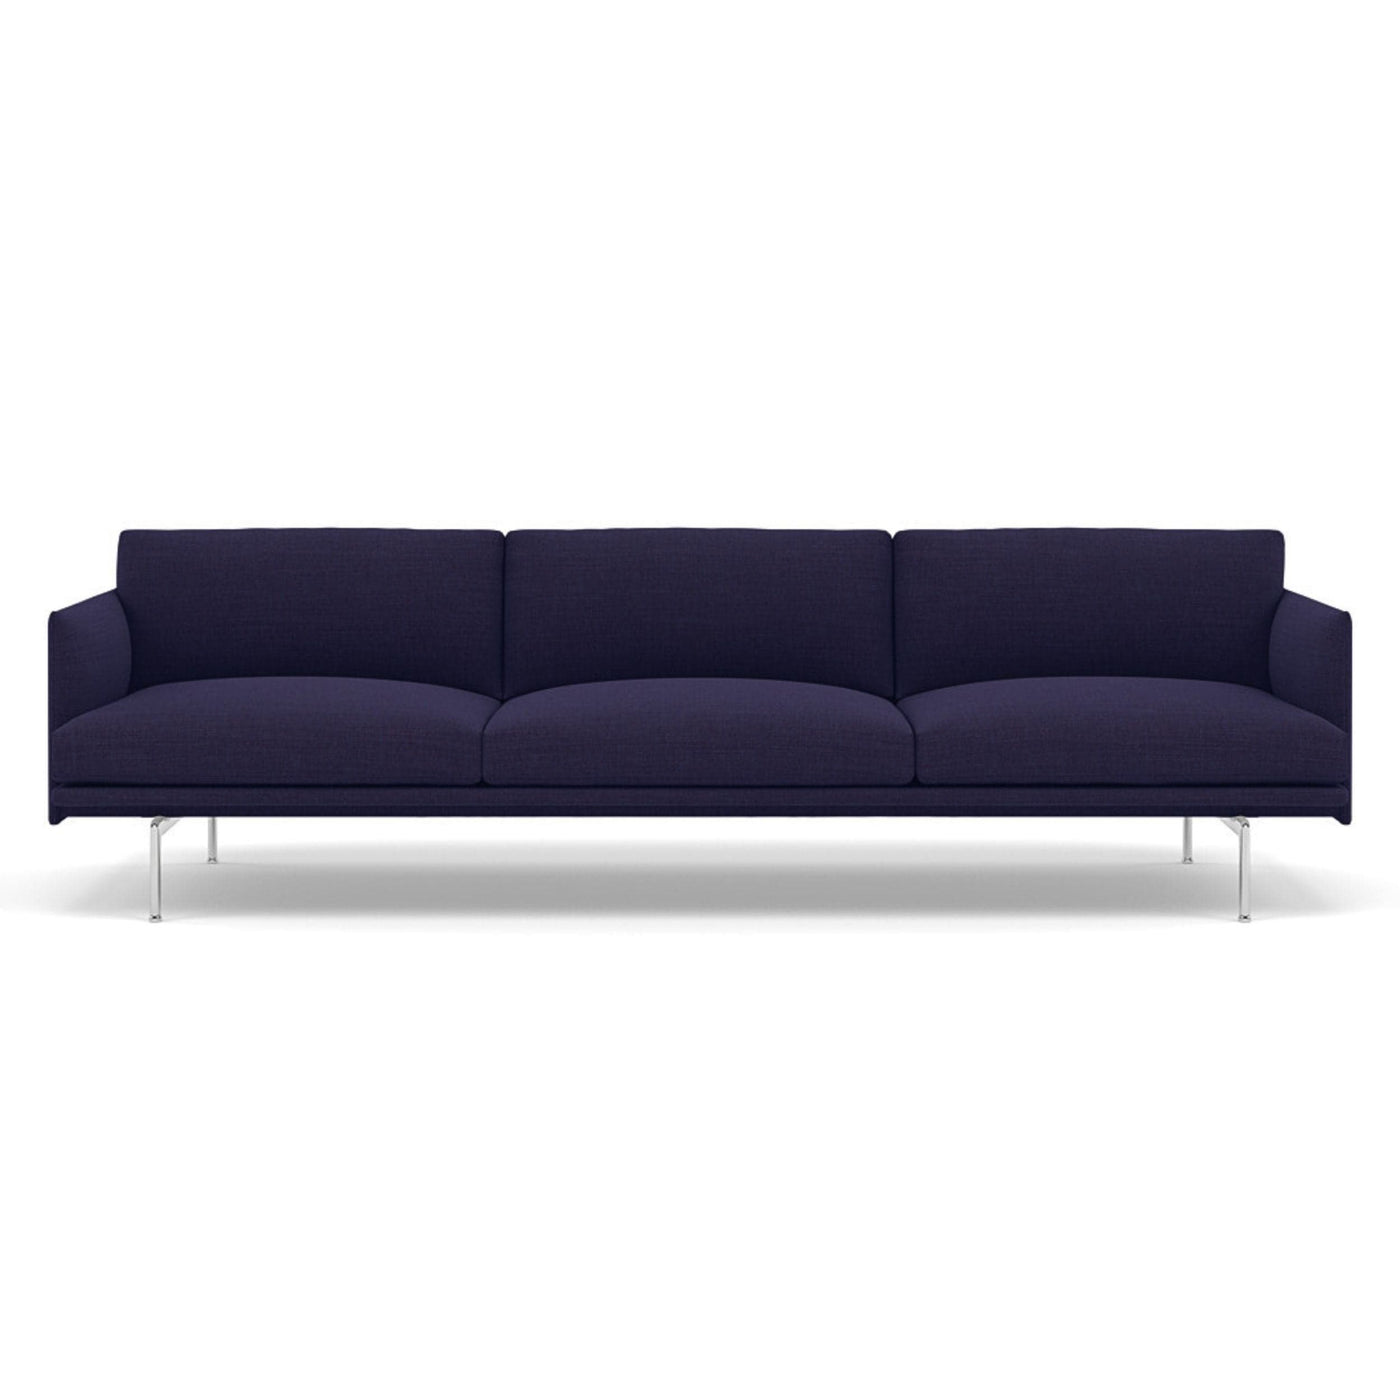 muuto outline 3.5 seater sofa in canvas 684 blue and polished aluminium legs. Made to order from someday designs. #colour_canvas-684-blue